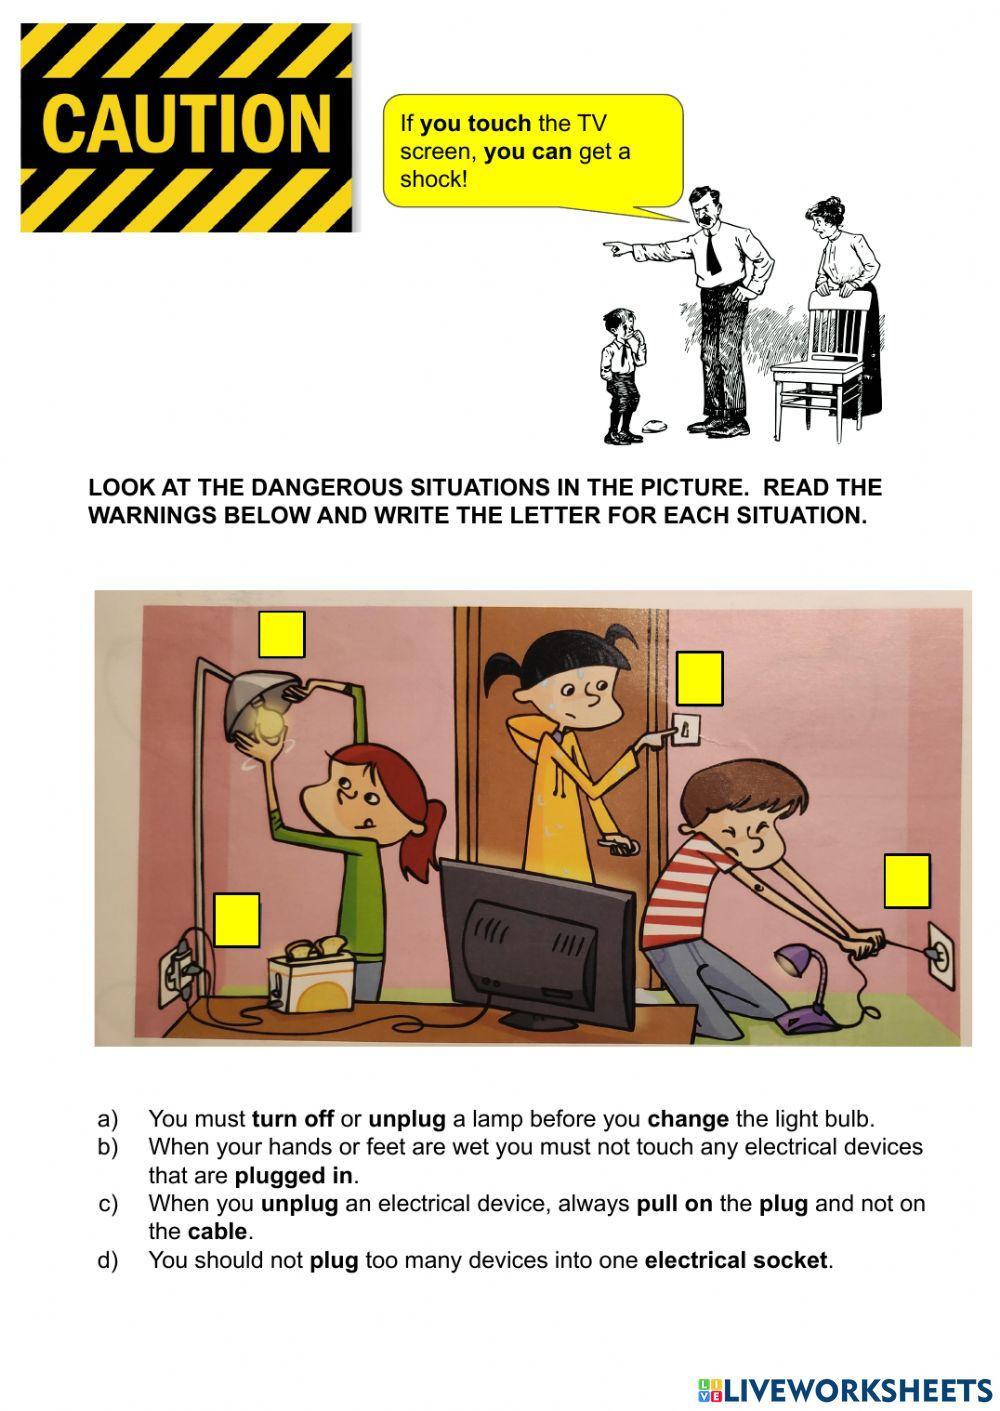 Electricity: dangerous situations